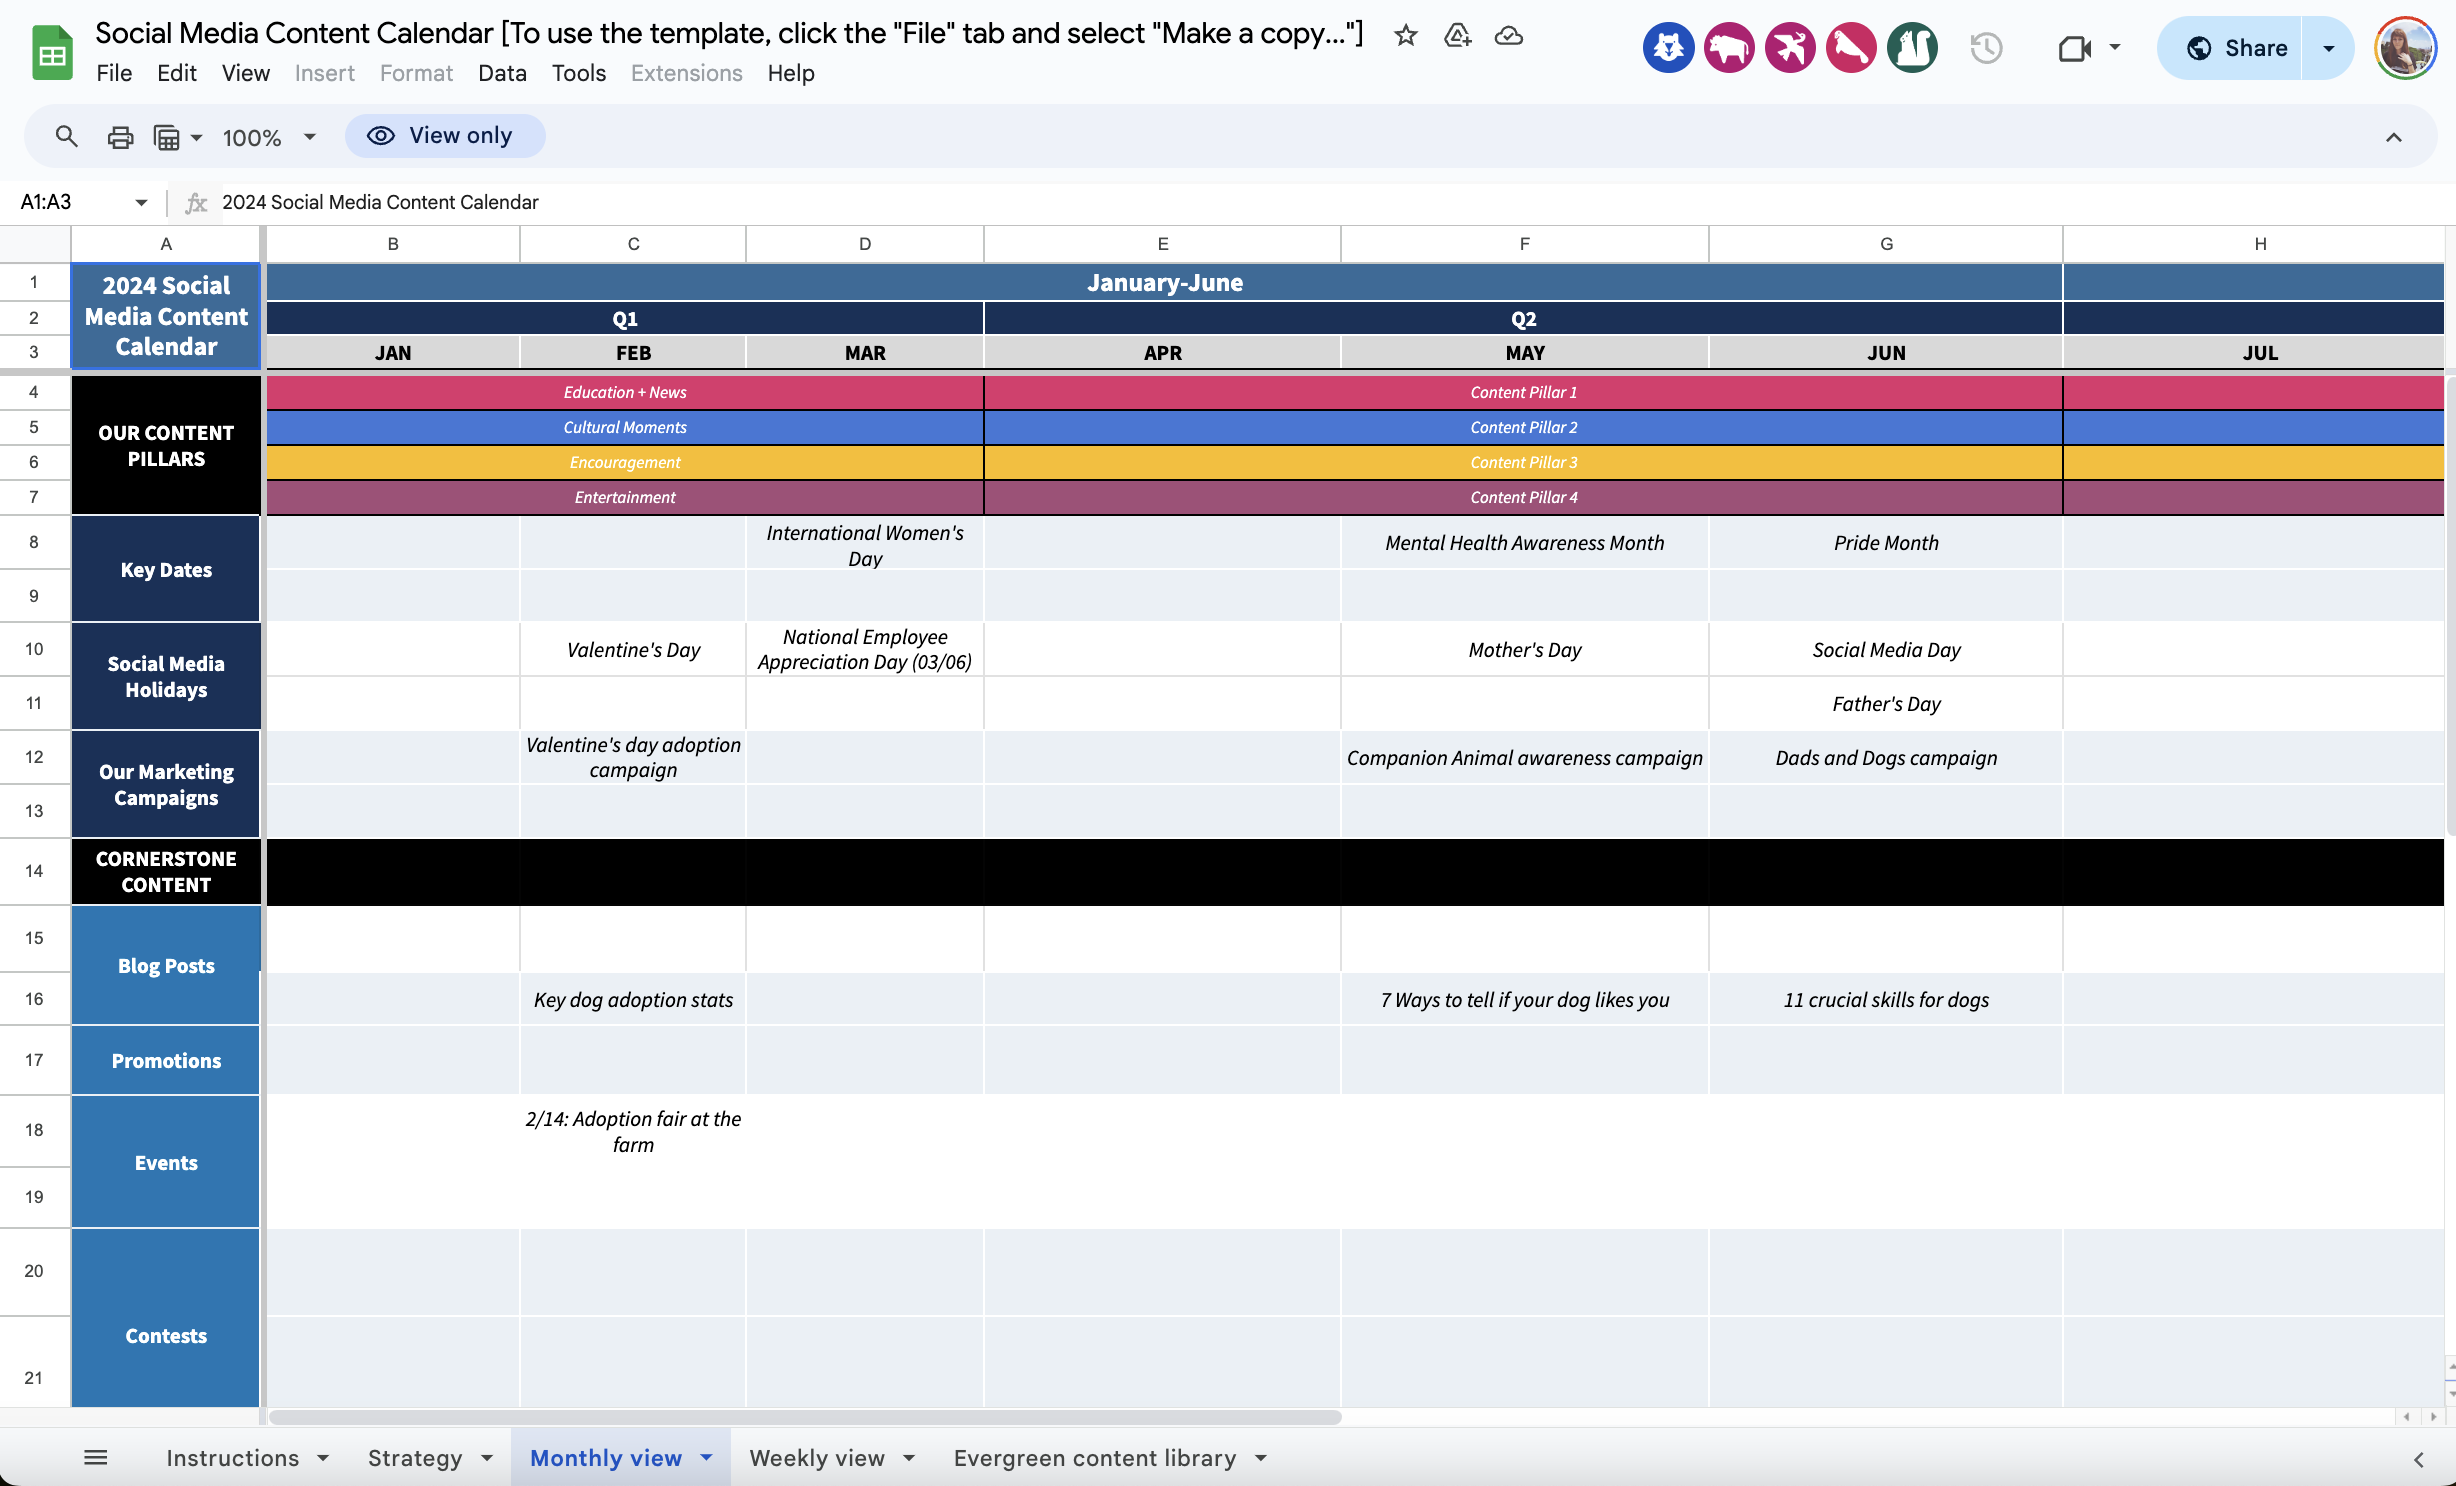 Screenshot of the Hootsuite social media content calendar template digital spreadsheet. The calendar is labeled by months and weeks, with colored bars indicating planned content themes and dates for various social events.